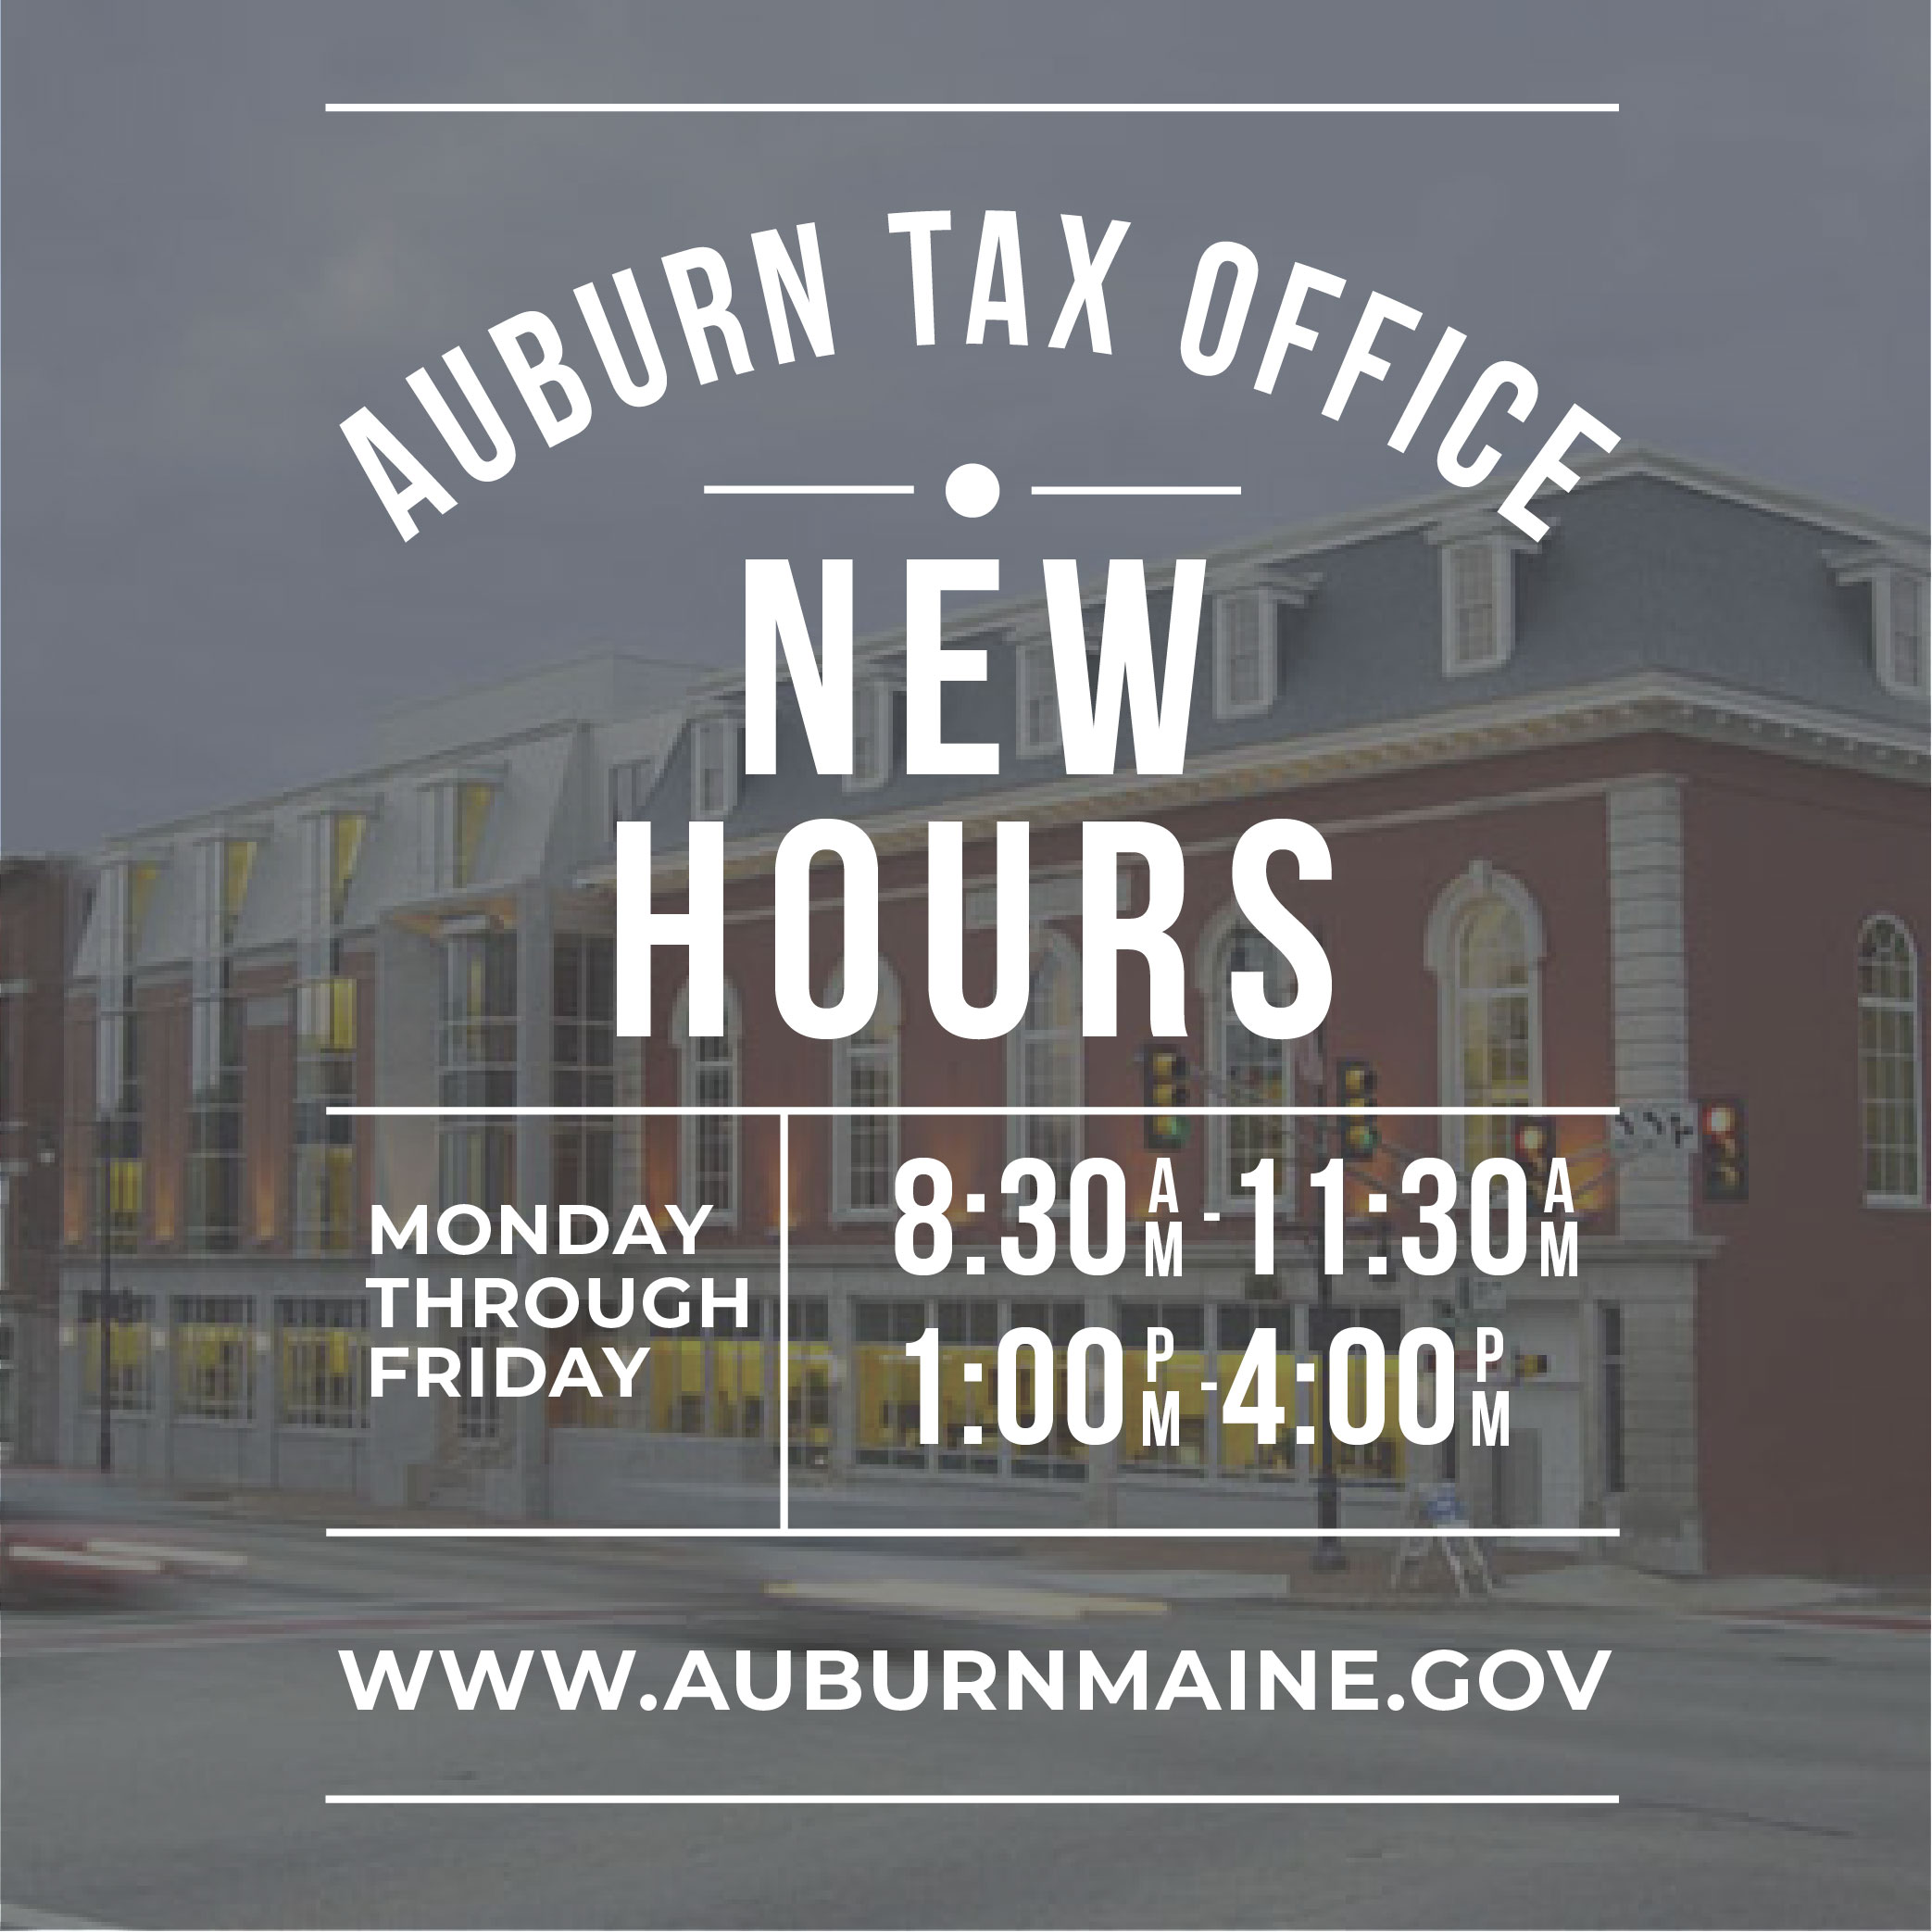 TAX OFFICE: New hours